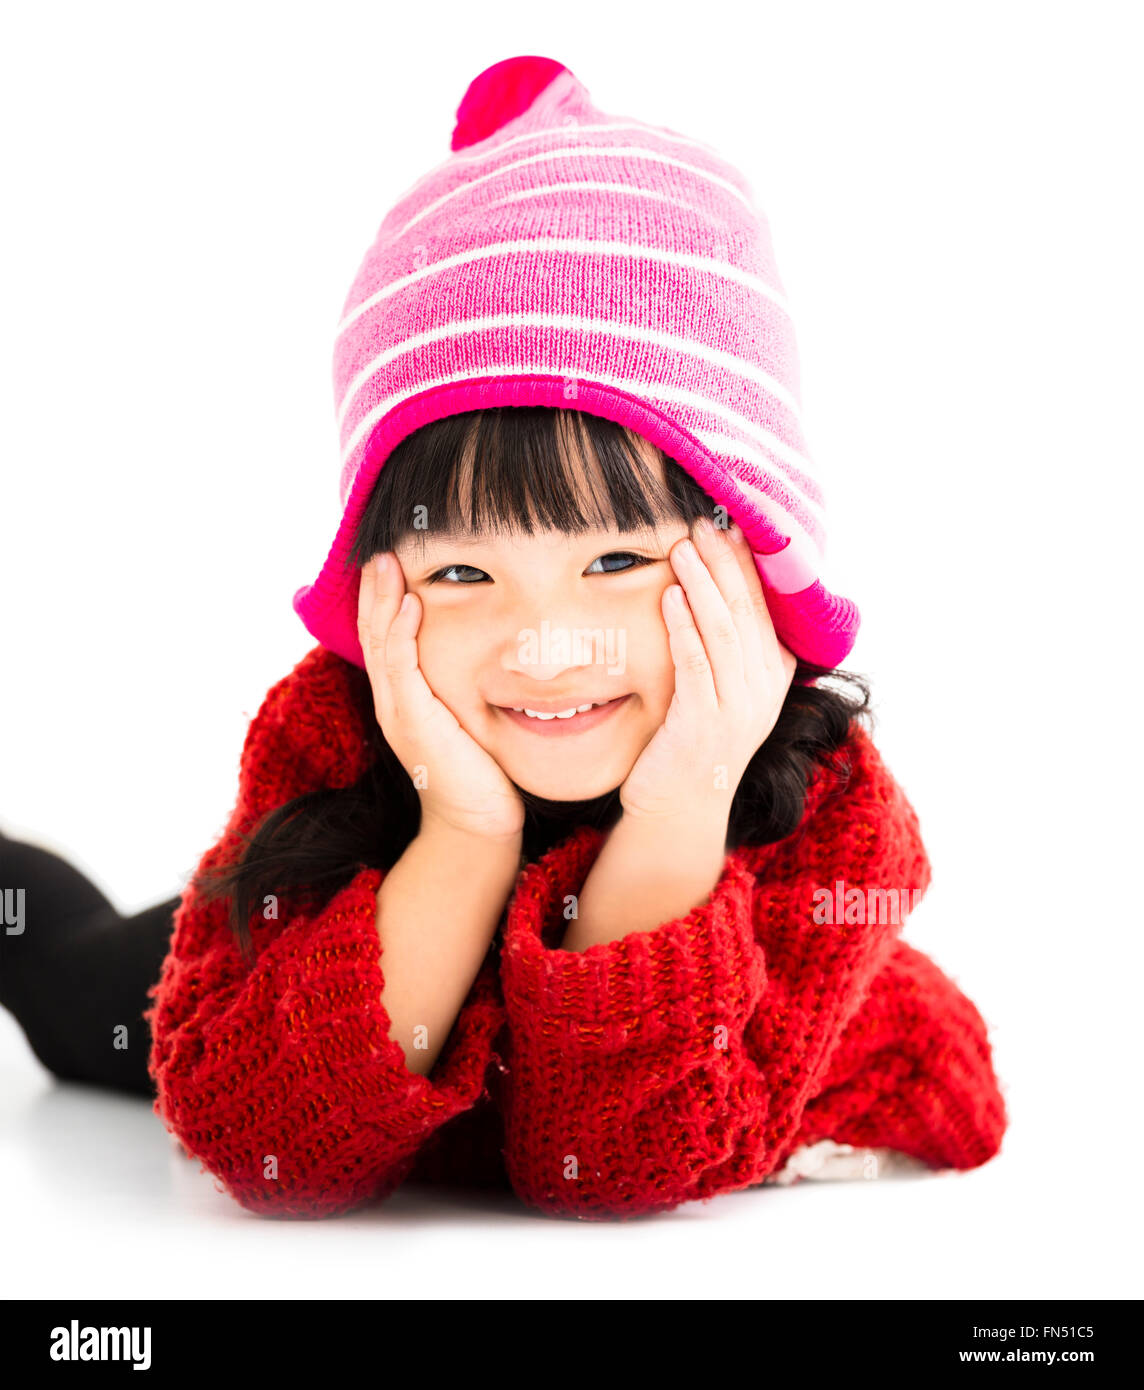 Happy little girl in winter wear Banque D'Images